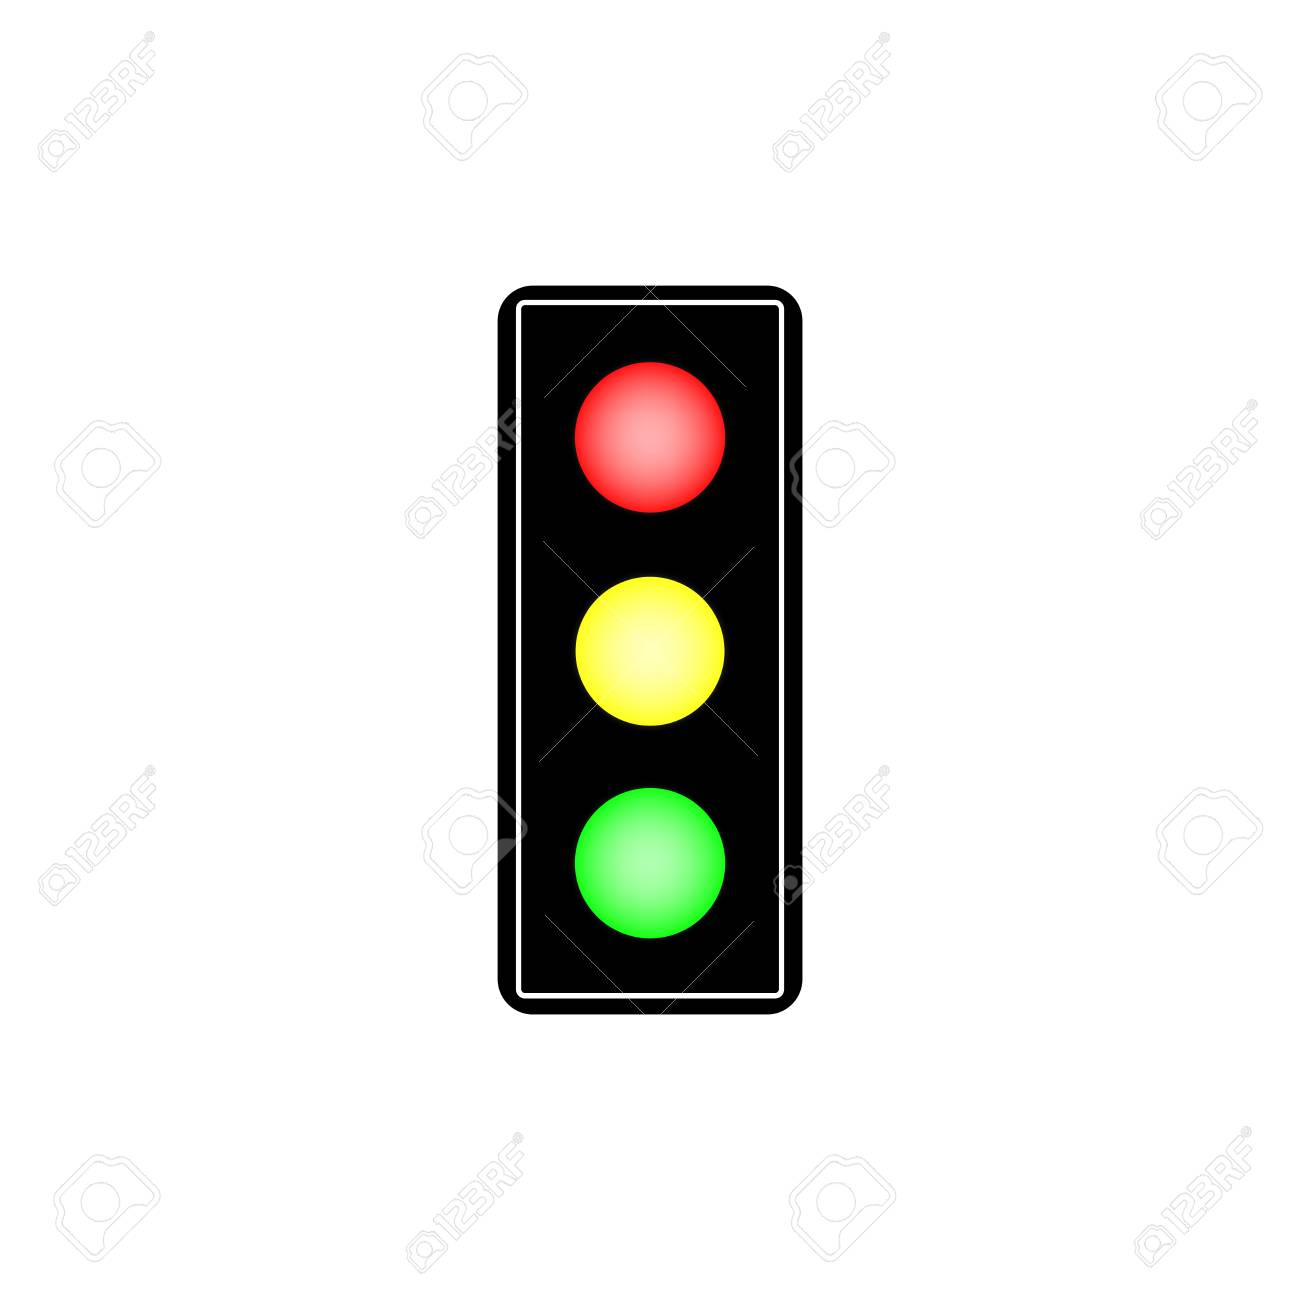 Detail Picture Of A Stop Light Nomer 20